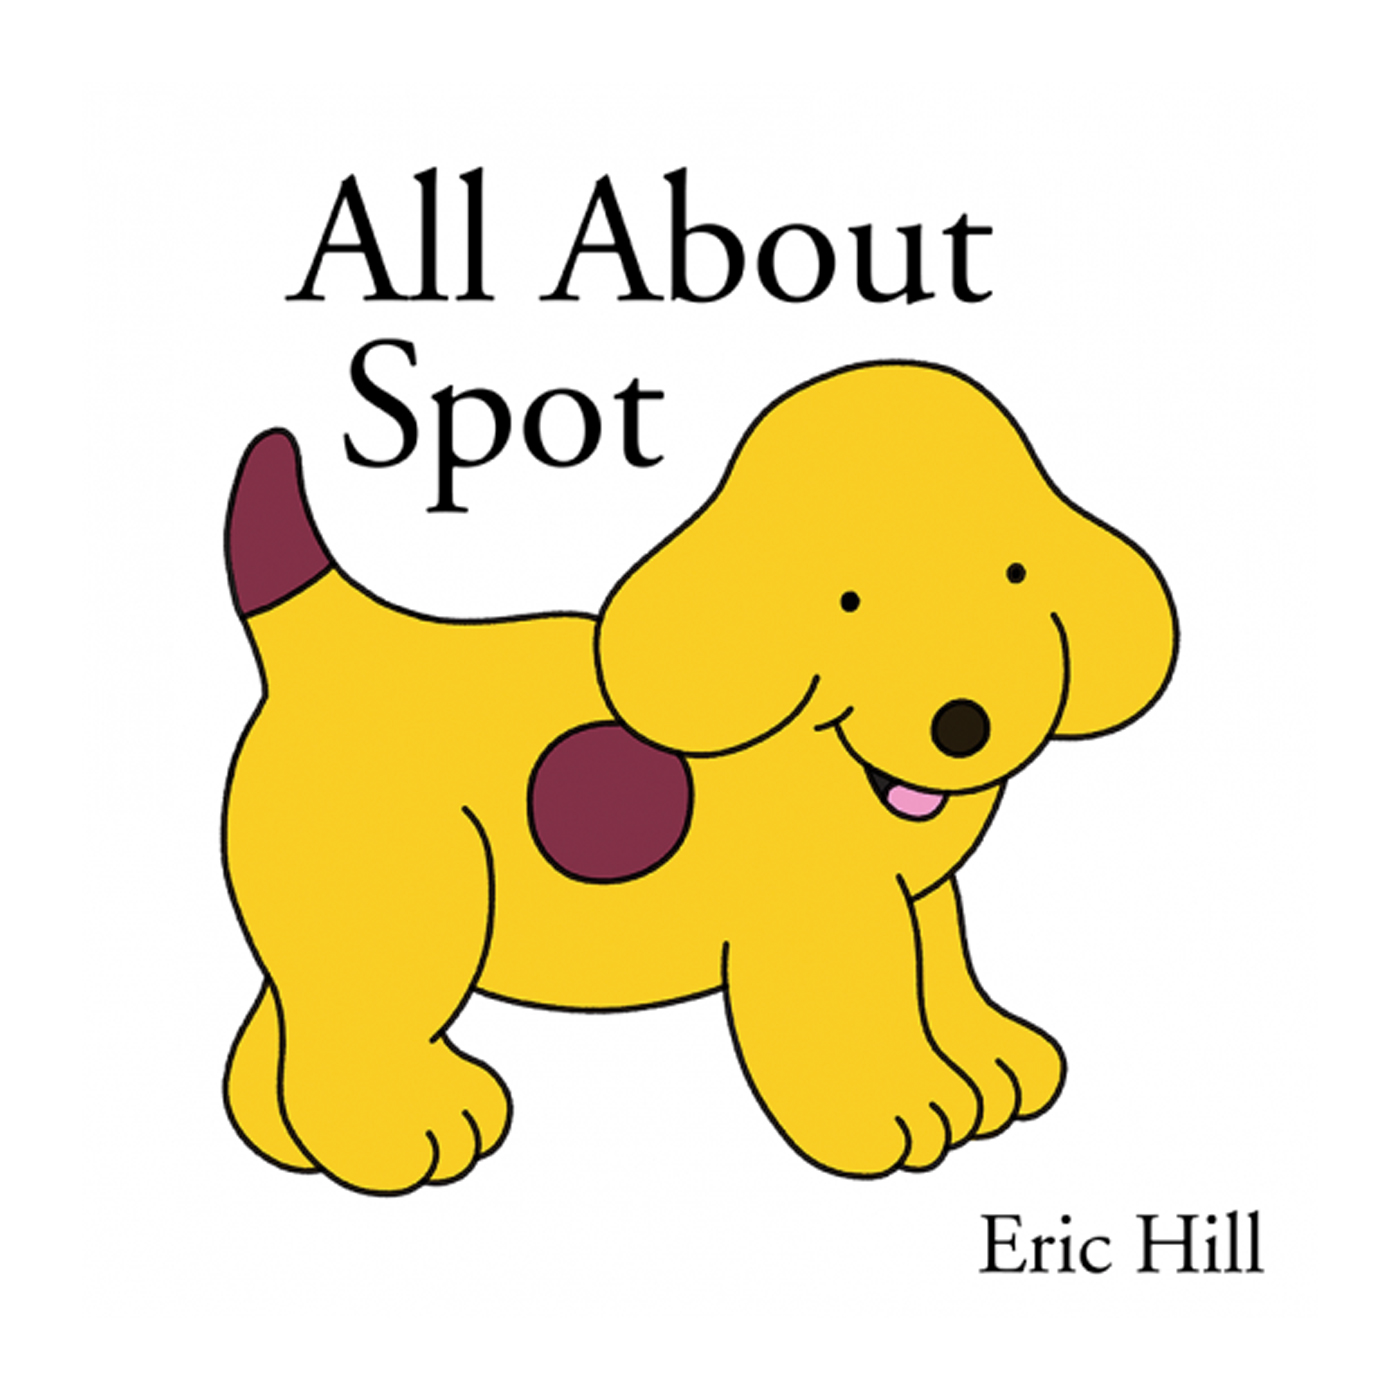  All About Spot